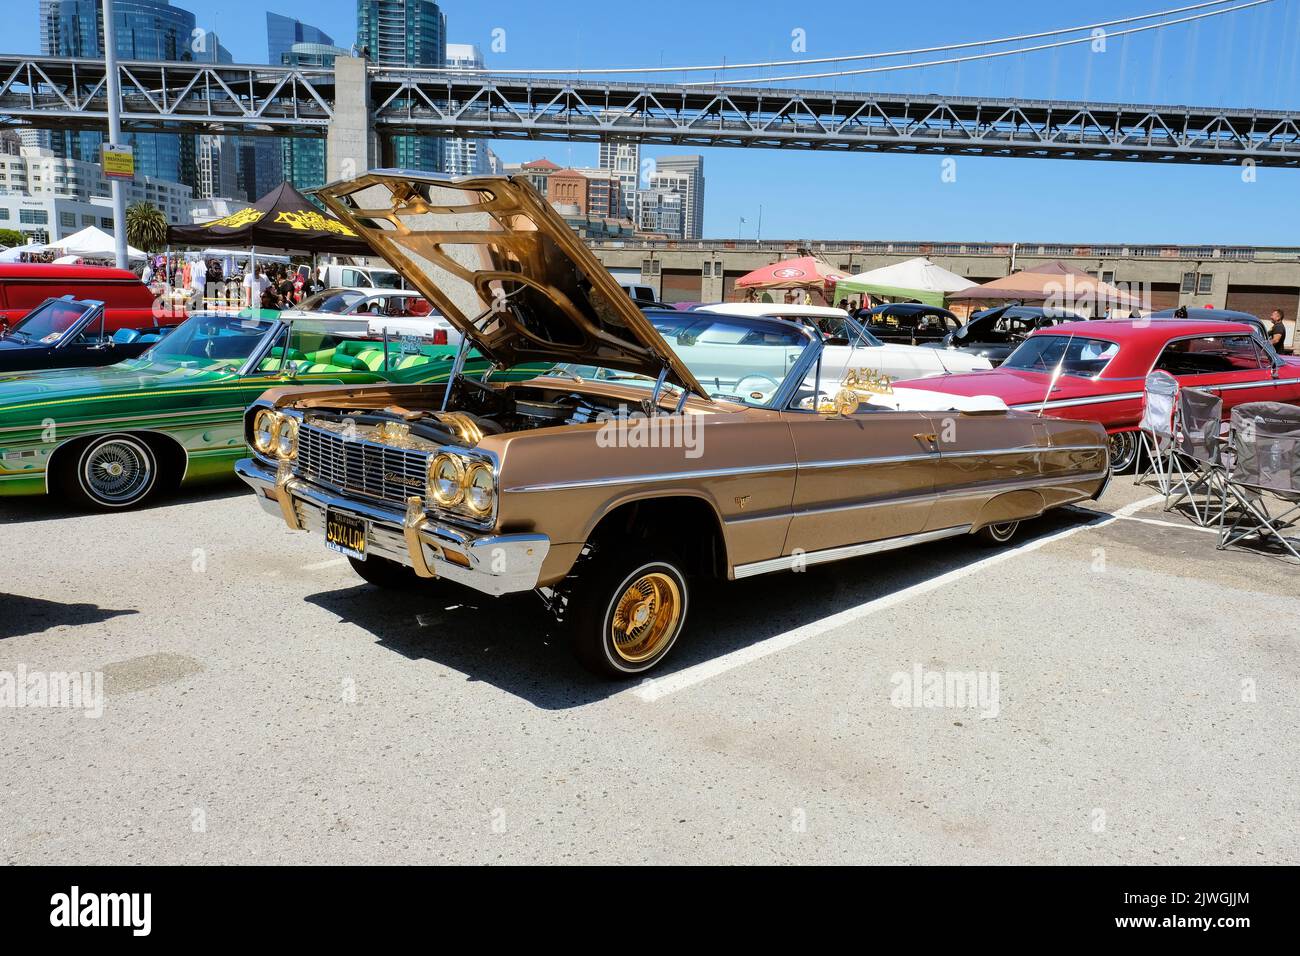 1964 Chevy Impala lowrider convertible in brown with gold trim; lowrider car culture at a car show at the Embarcadero in San Francisco, California. Stock Photo